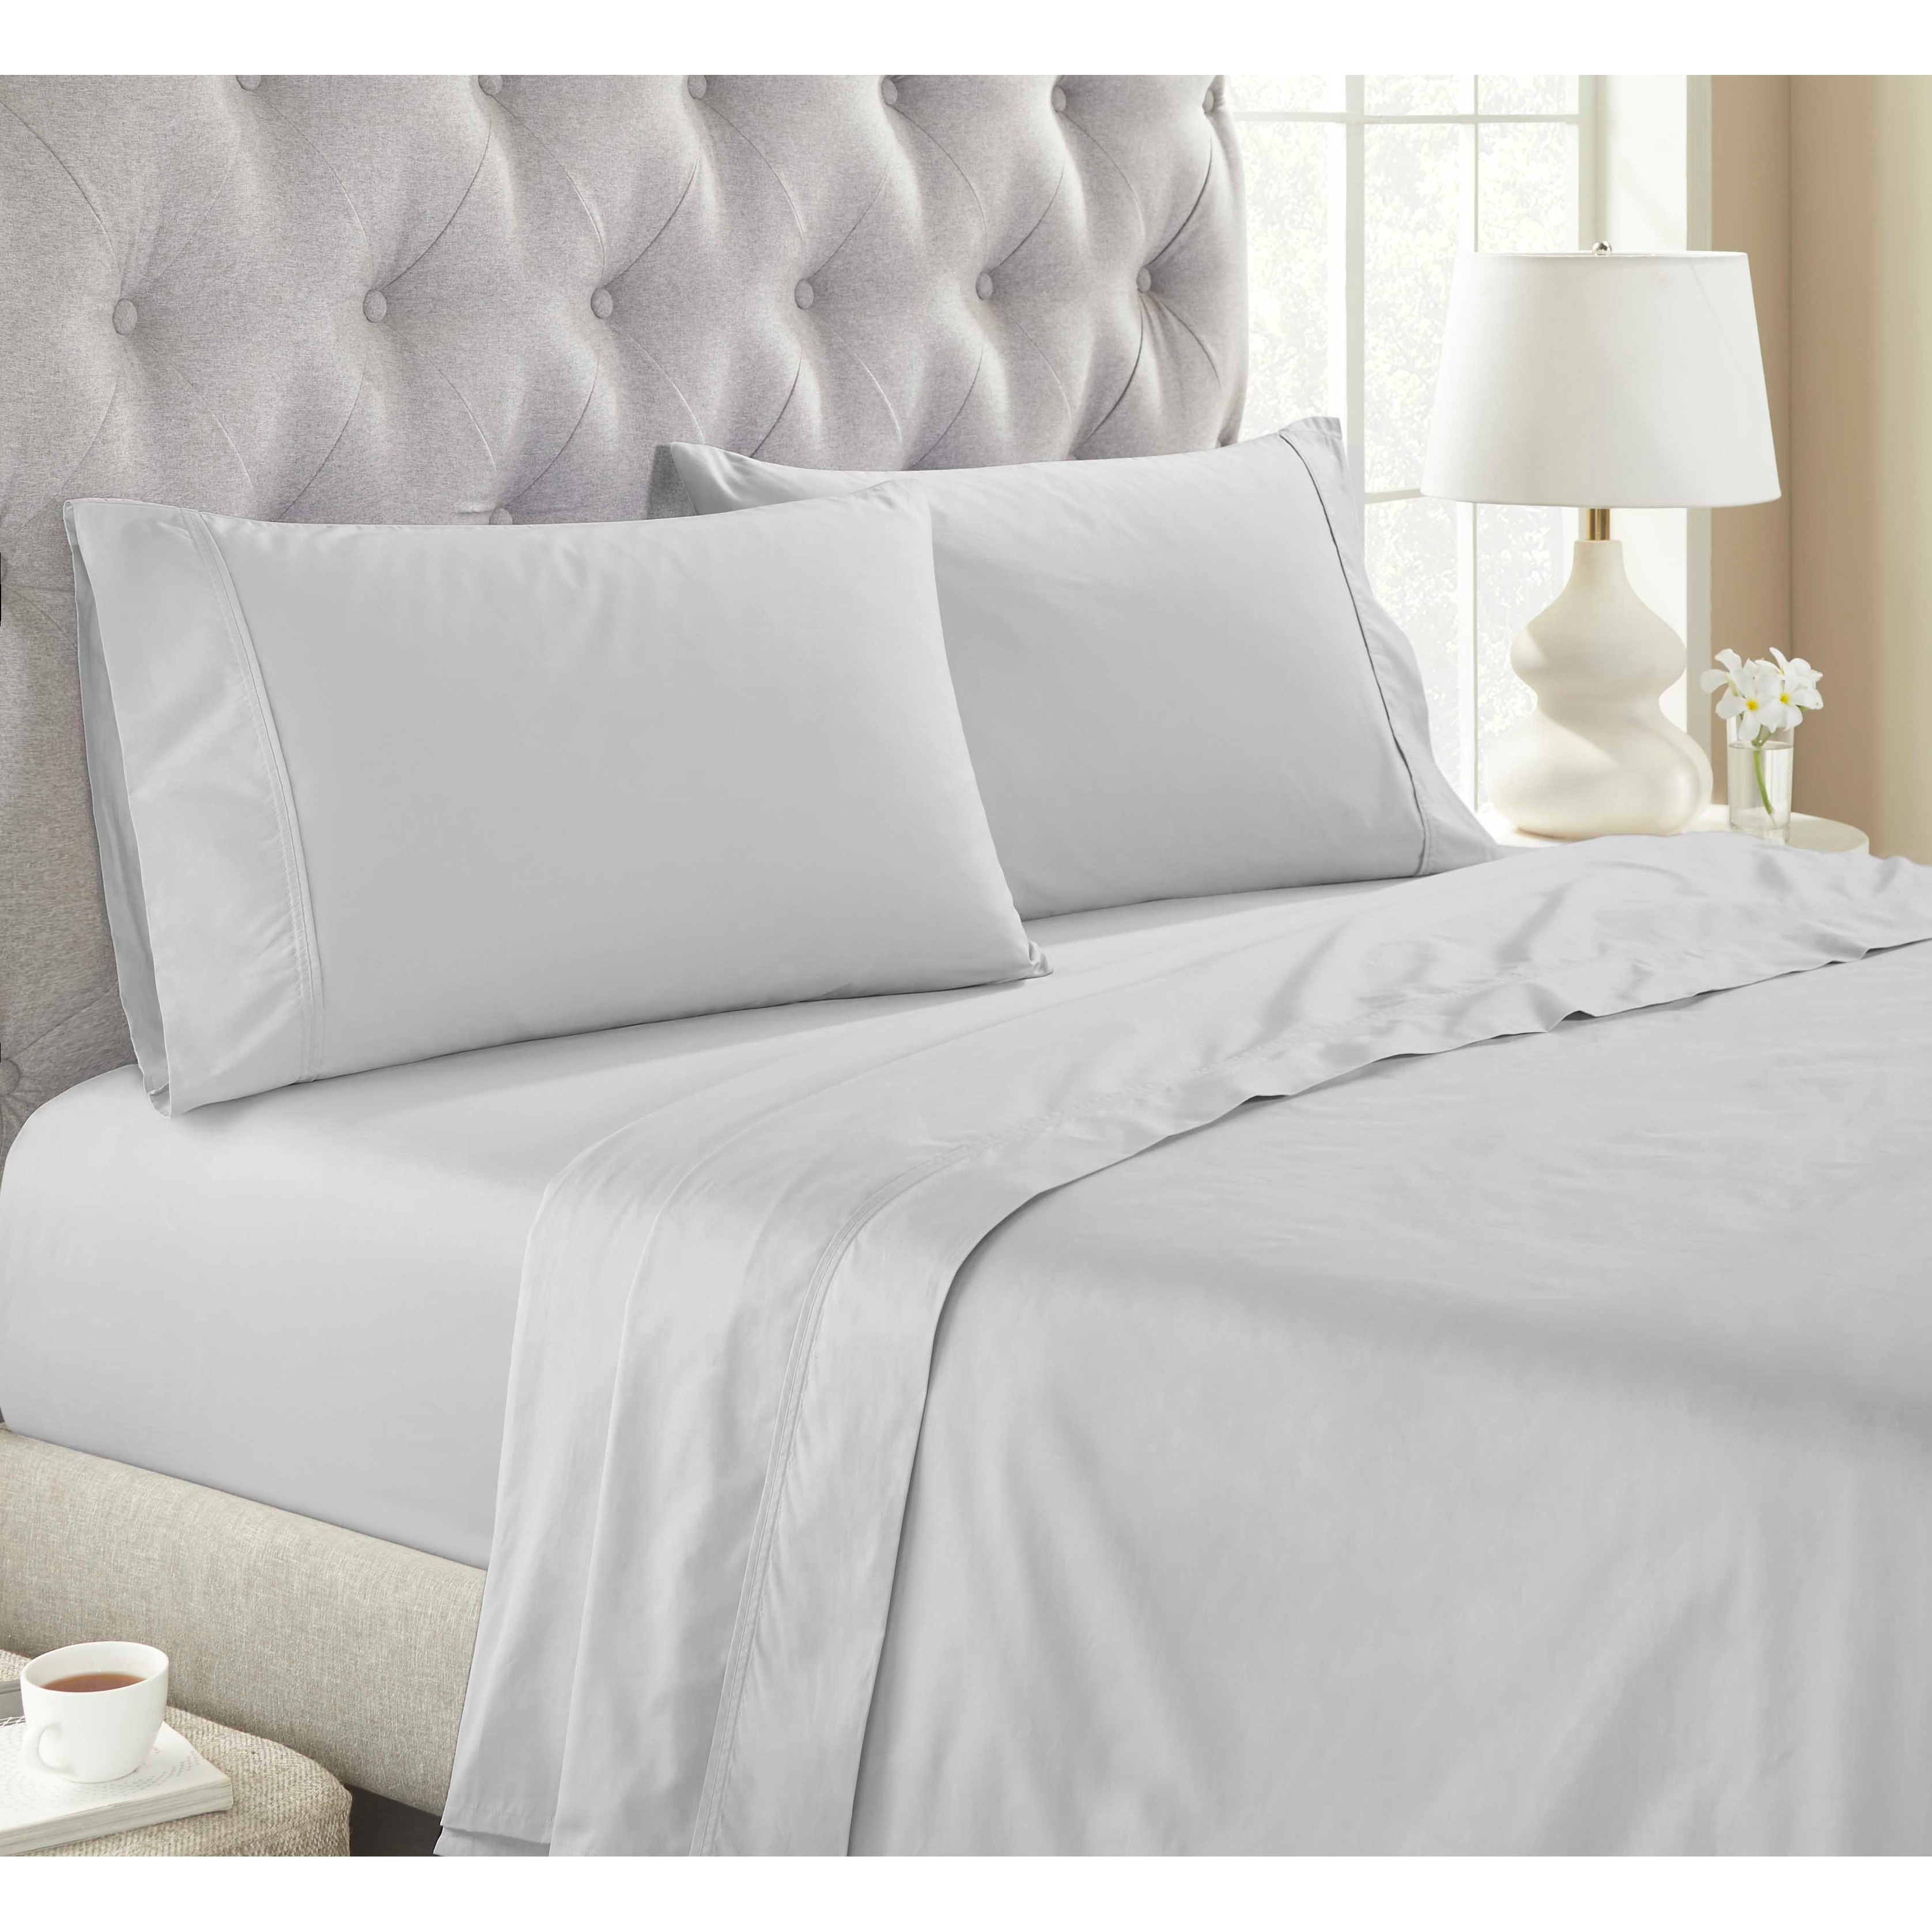 Percale Bed Sheets and Pillowcases - Bed Bath & Beyond